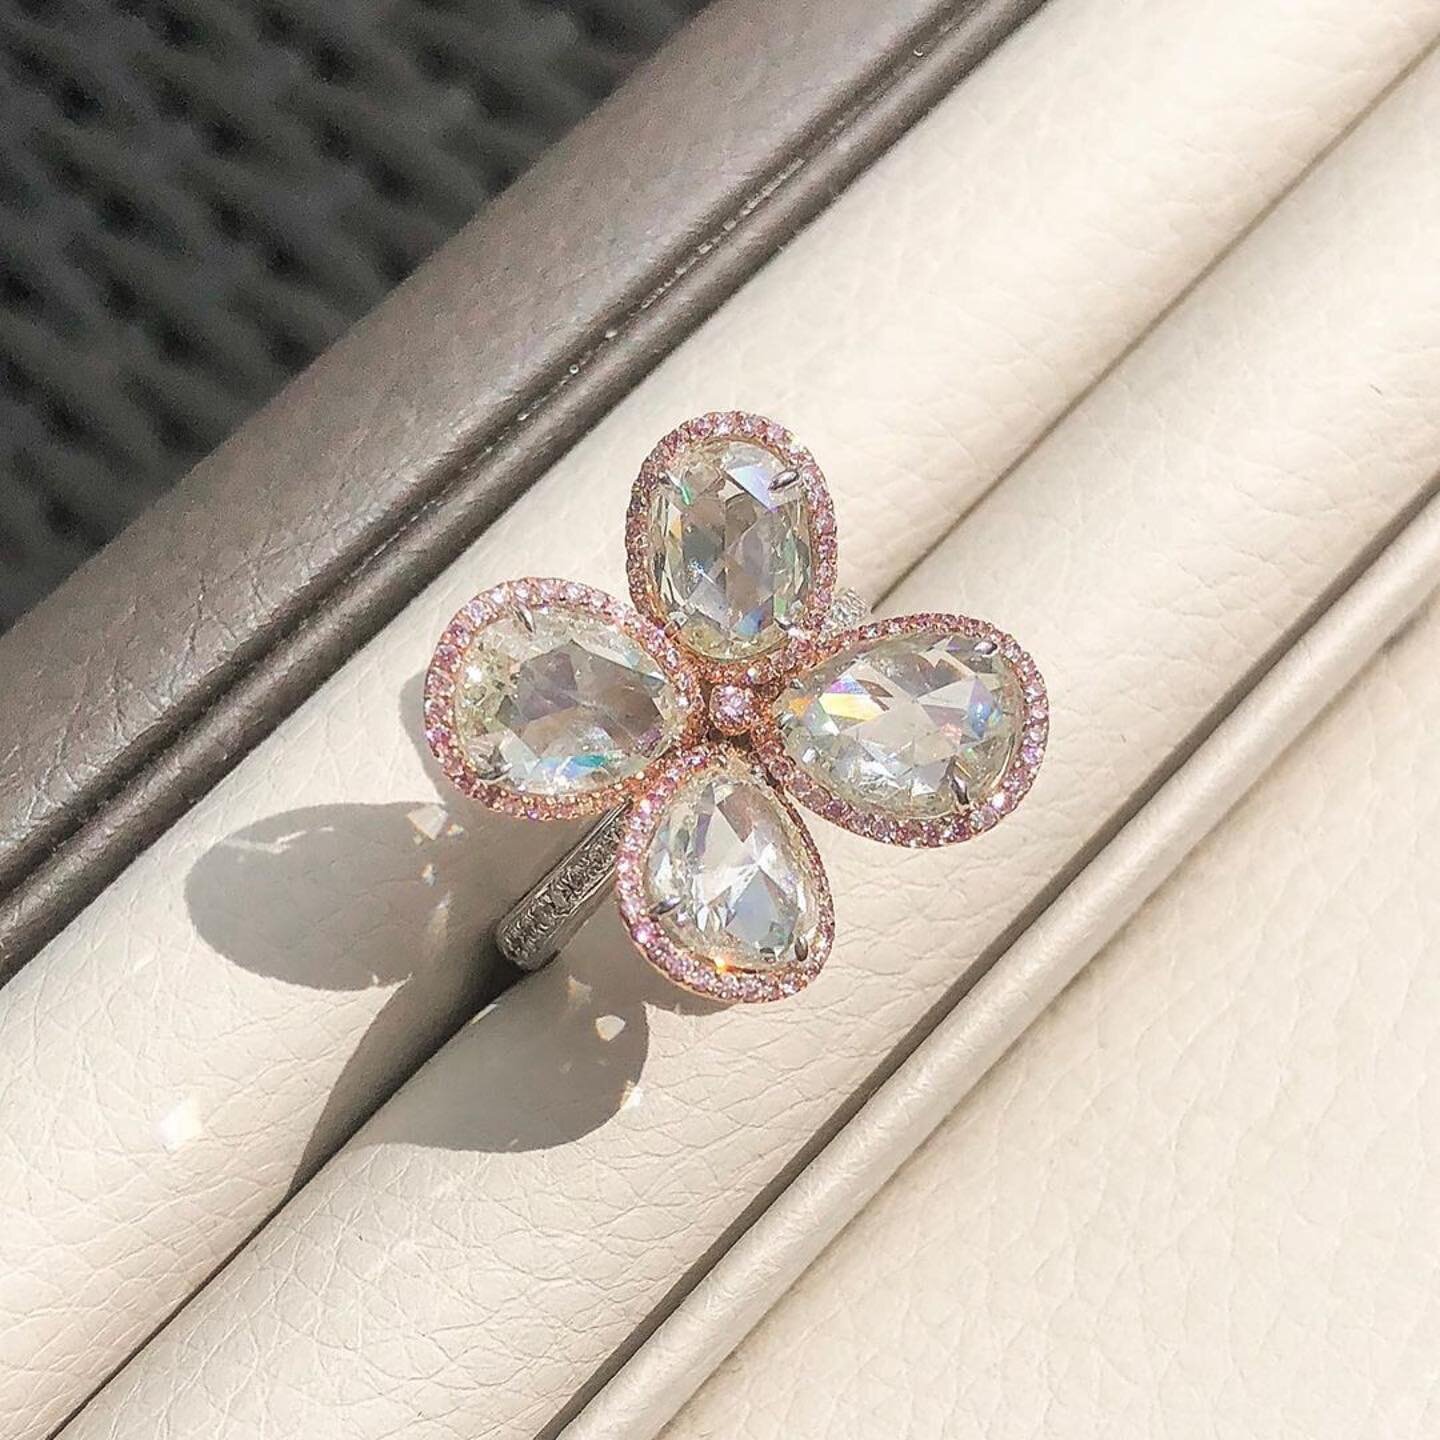 Here comes the sun ☀️ or at least it&rsquo;s radiance courtesy this outstanding ring by our member @amtc.sg featuring 4 beautifully cut rose-cut diamonds encased by pink diamonds. We love how the rose-cuts gravitate towards the 0.02 Ct brilliant pink